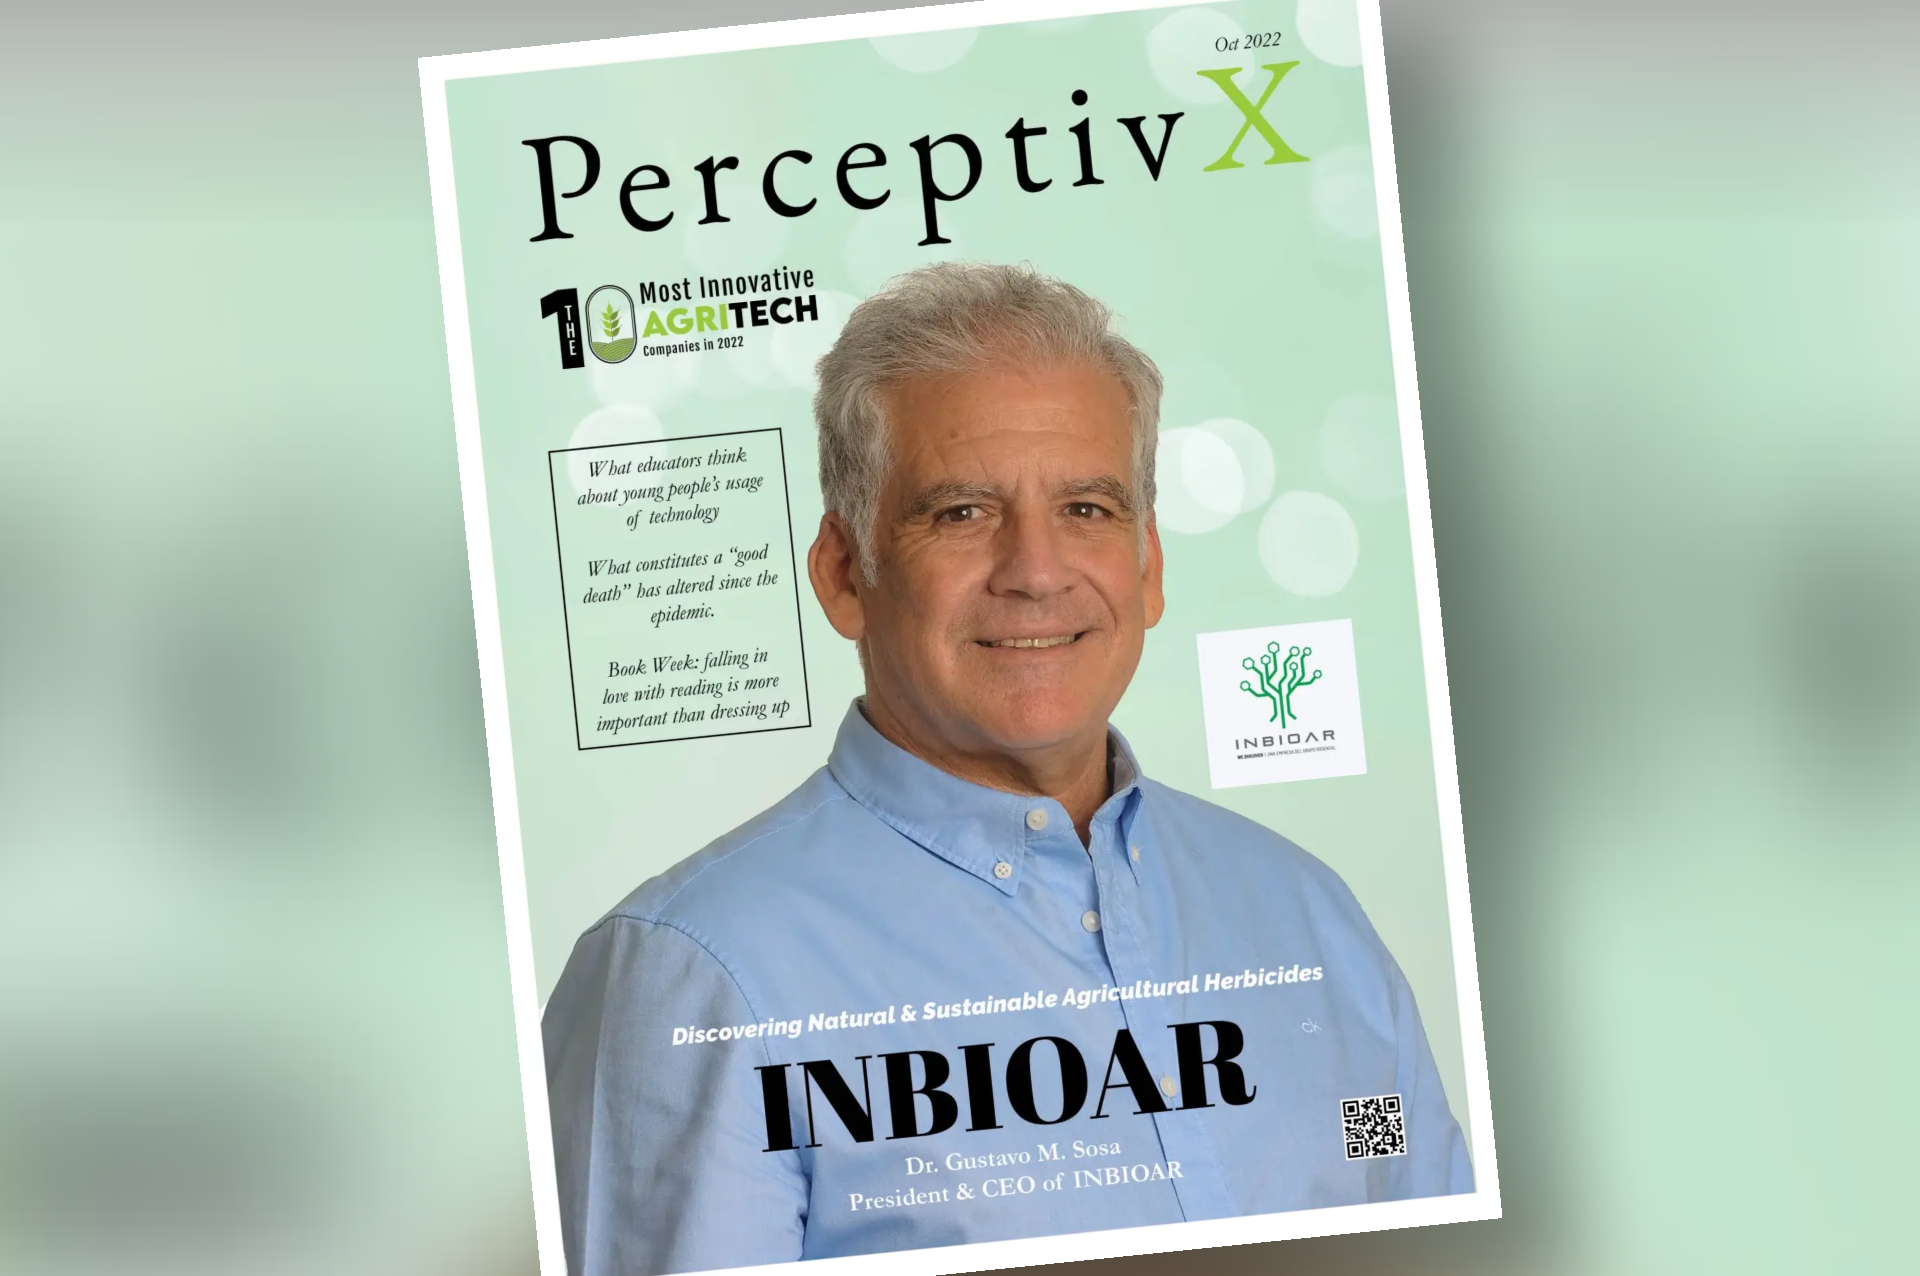 PerceptivX Magazine - INBIOAR: Discovering Natural & Sustainable Agricultural Herbicides